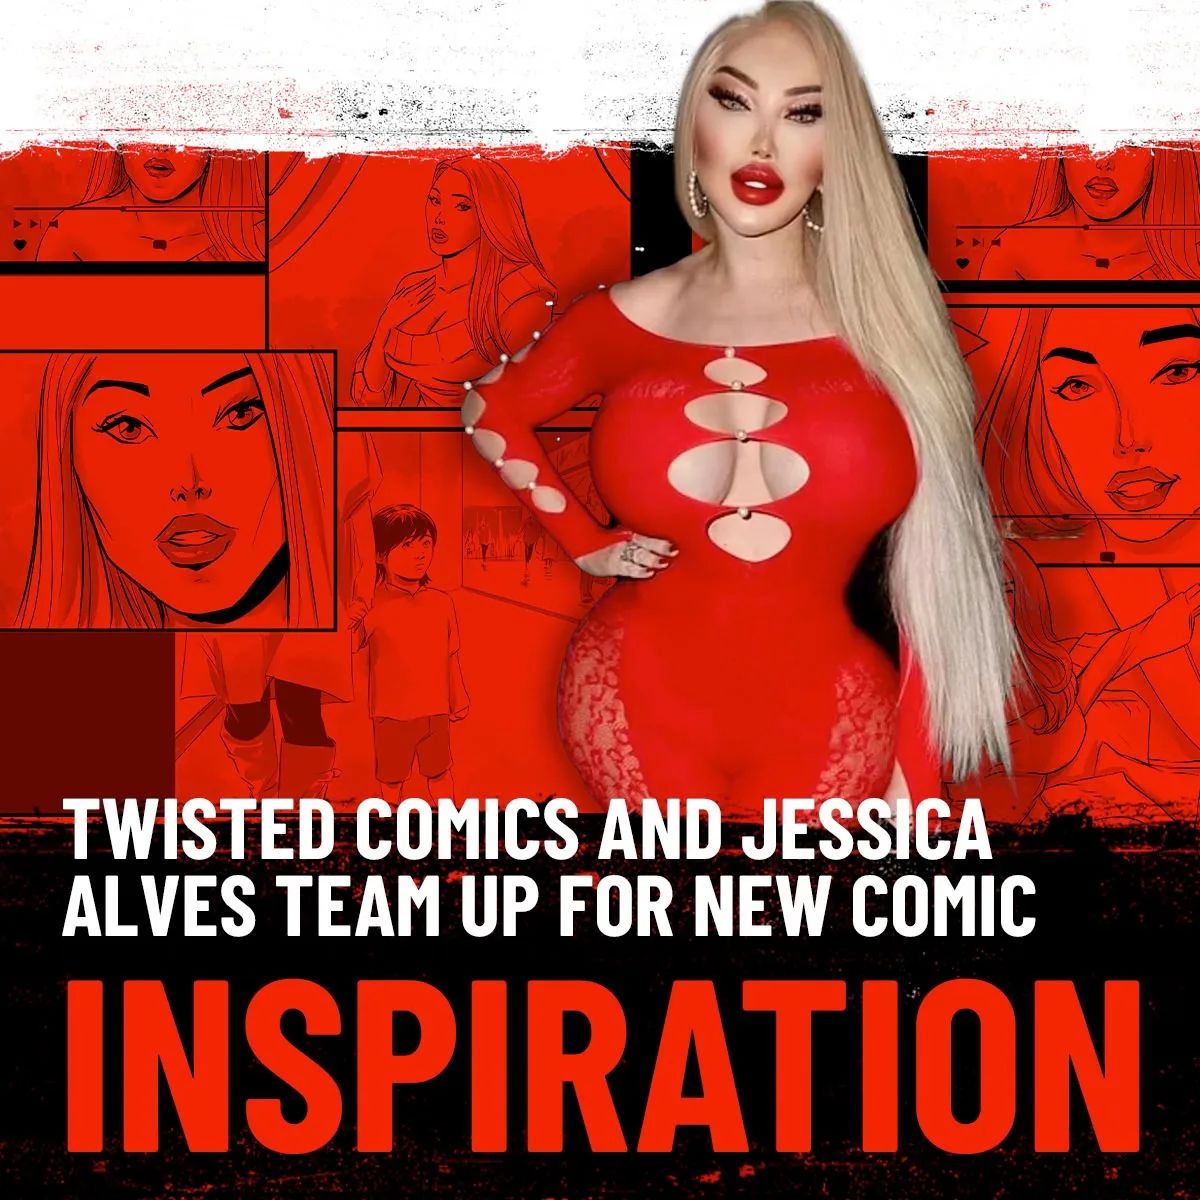 We're partnering with @jessicaalvesuk to raise awareness about gender dysphoria.

Our new comic "Inspiration" features Jessica's true story and unseen images from her childhood with the hope of educating parents on recognising gender dysphoria. “Inspiration” will join Twisted Dark's collection of stories on real-life struggles.

The 1st issue launches as a Kickstarter collectible in May. Sign up to be notified at the link in our bio.

#NGTwistedComics #JessicaAlves #Collaboration